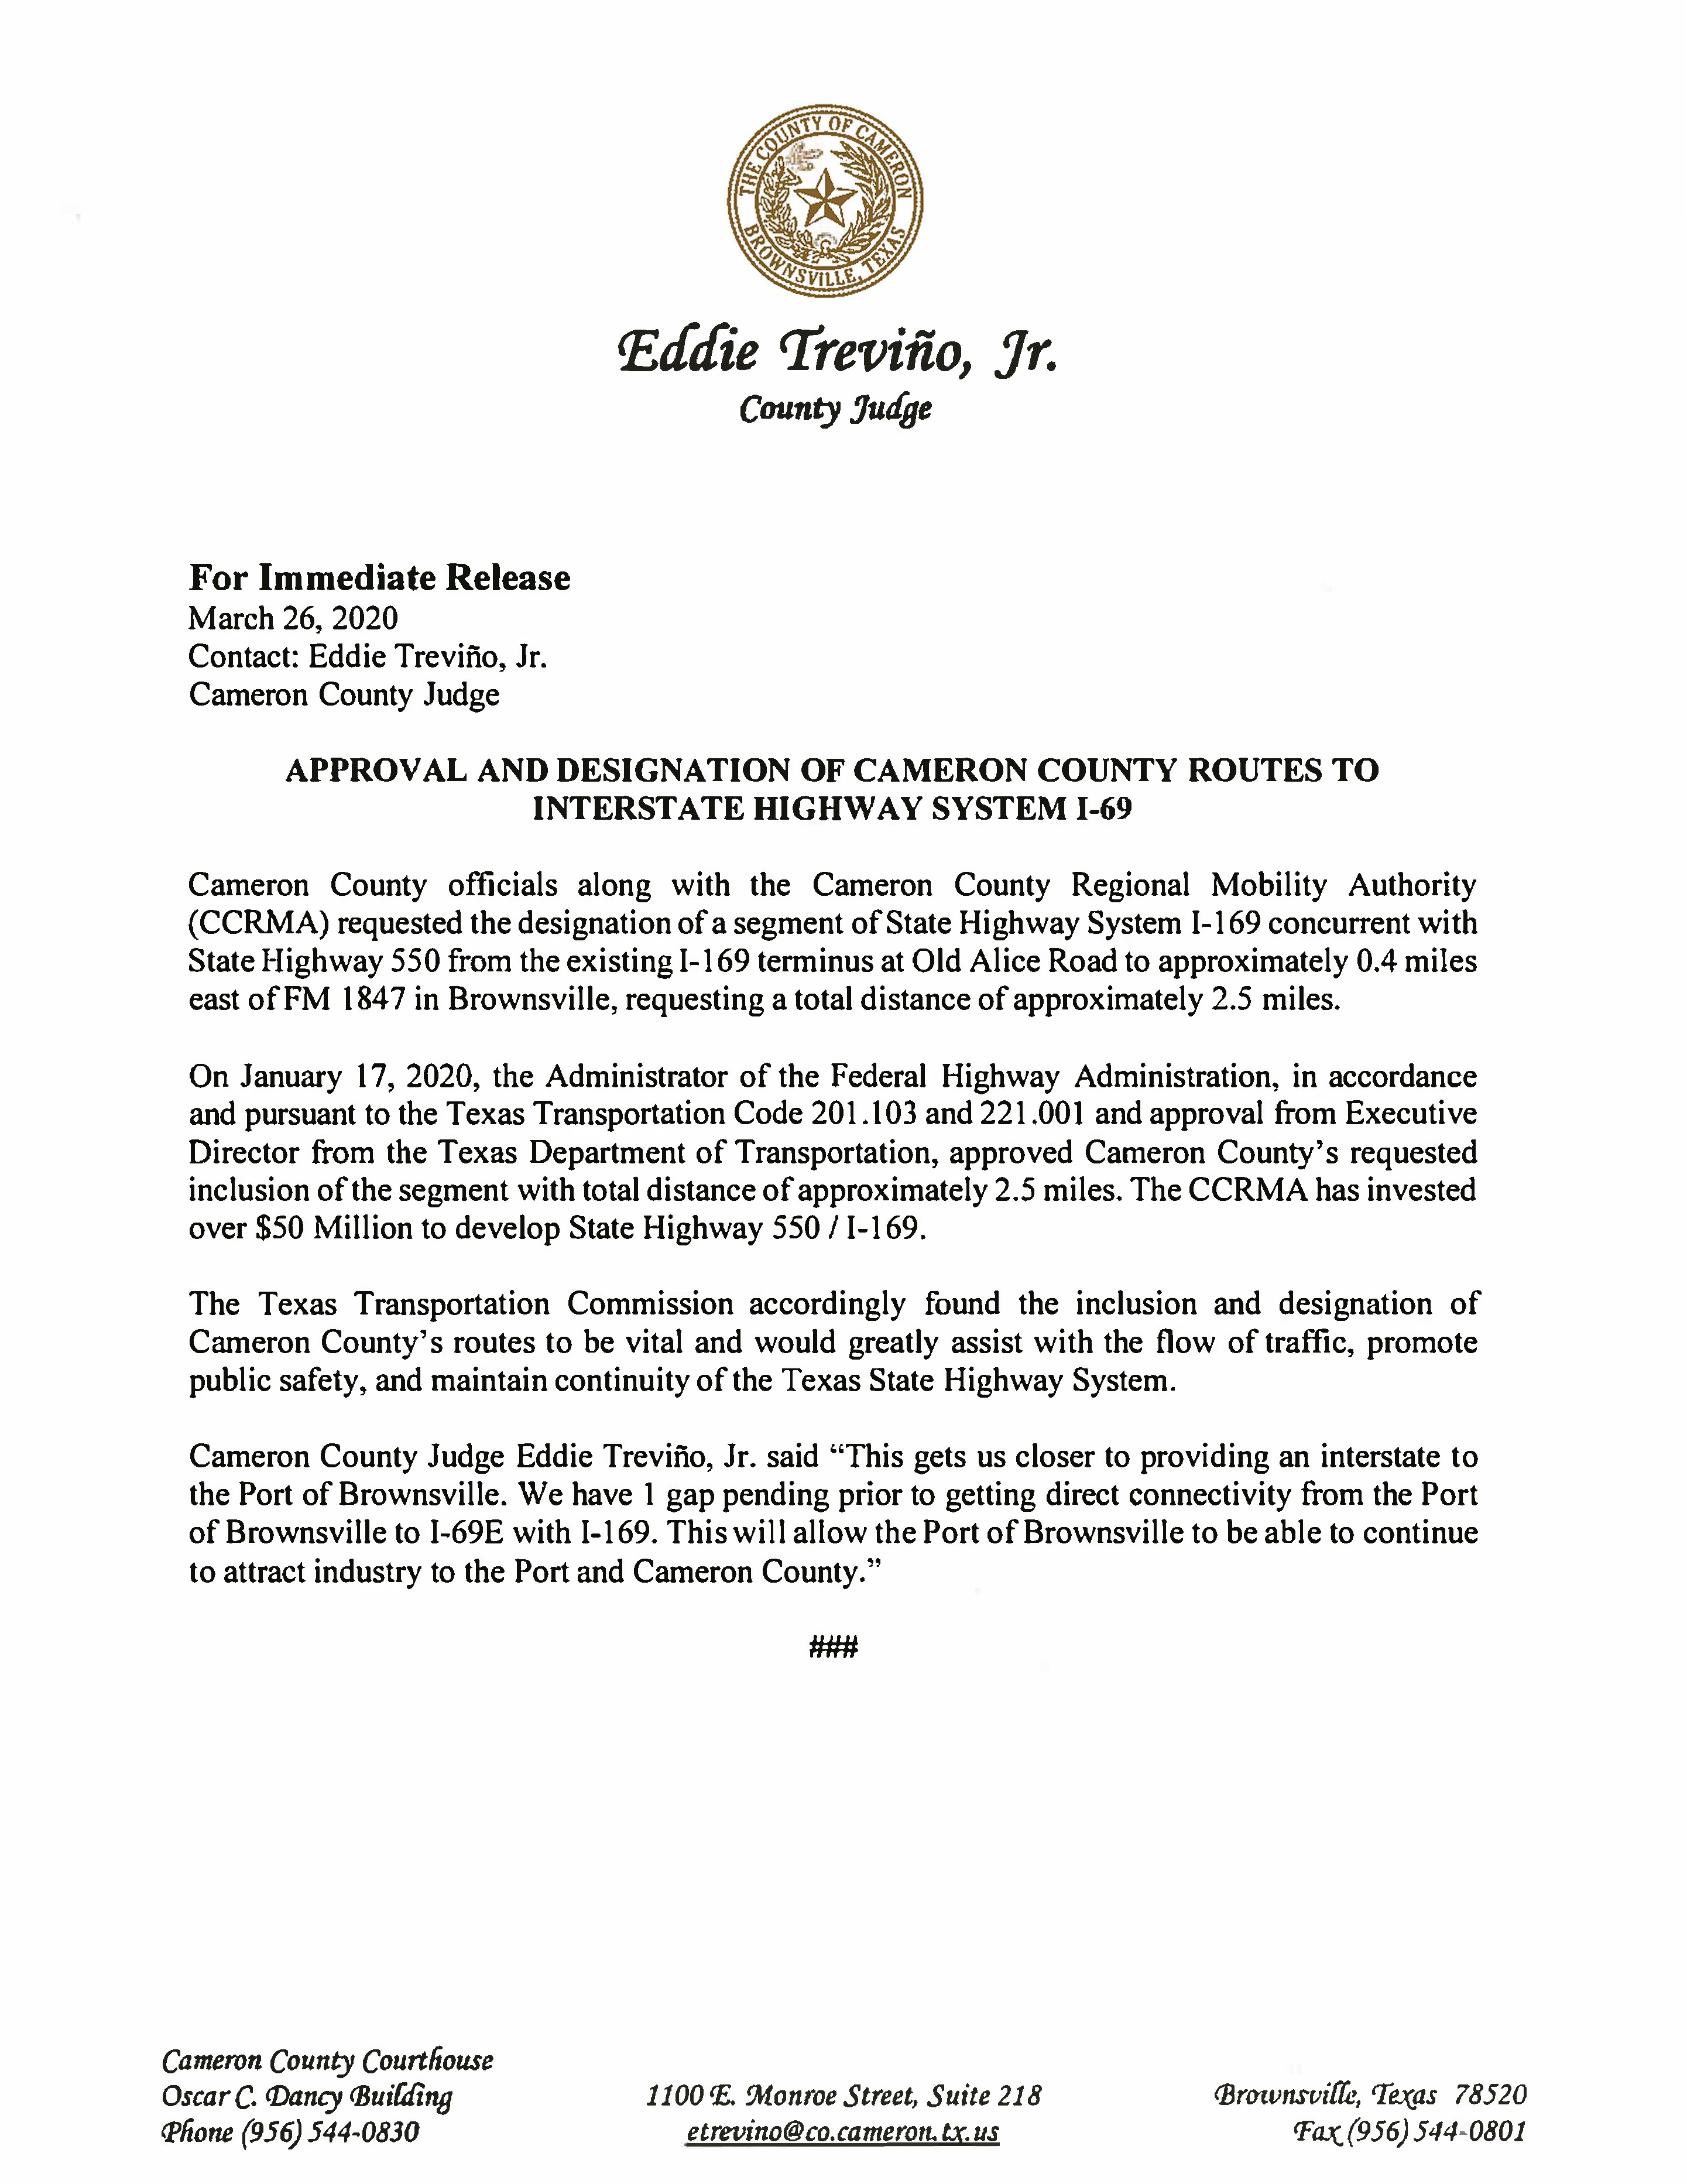 03 26 2020 For Immediate Release Approval And Designation Of Cameron County Routes To Interstate Highway System I 69 2 Page 1